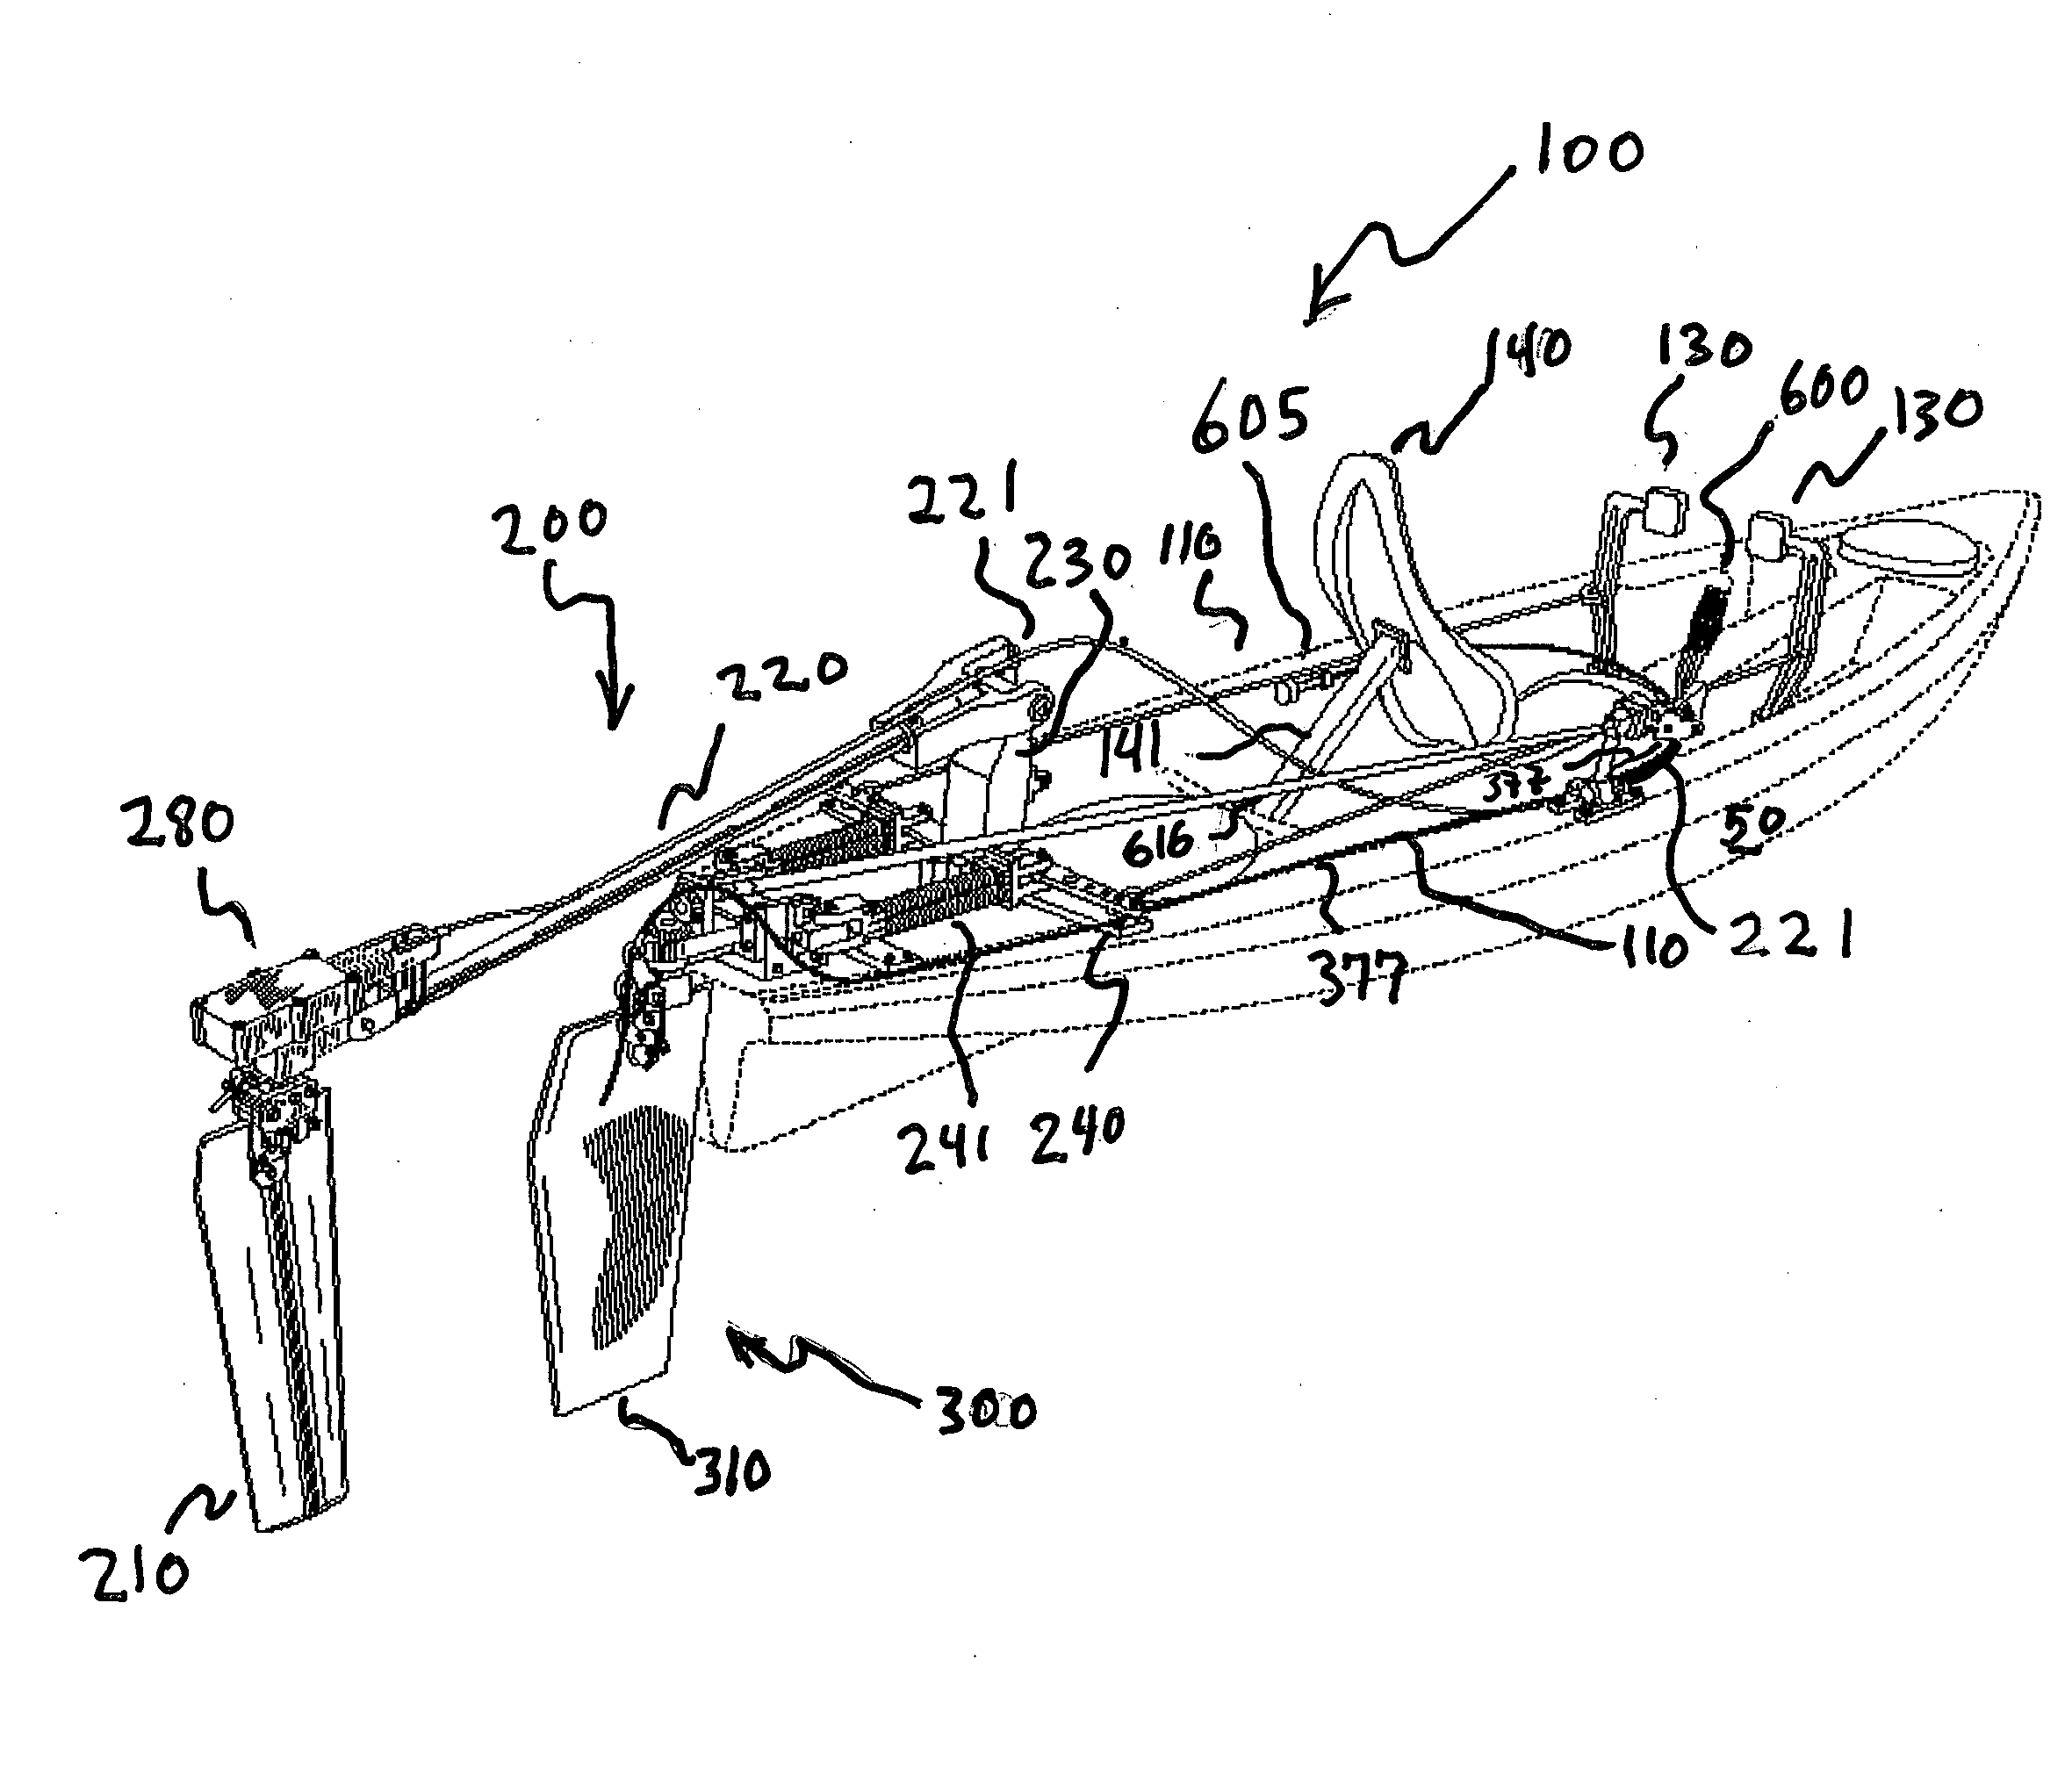 Vessel propelled by oscillating fin with control mechanisms